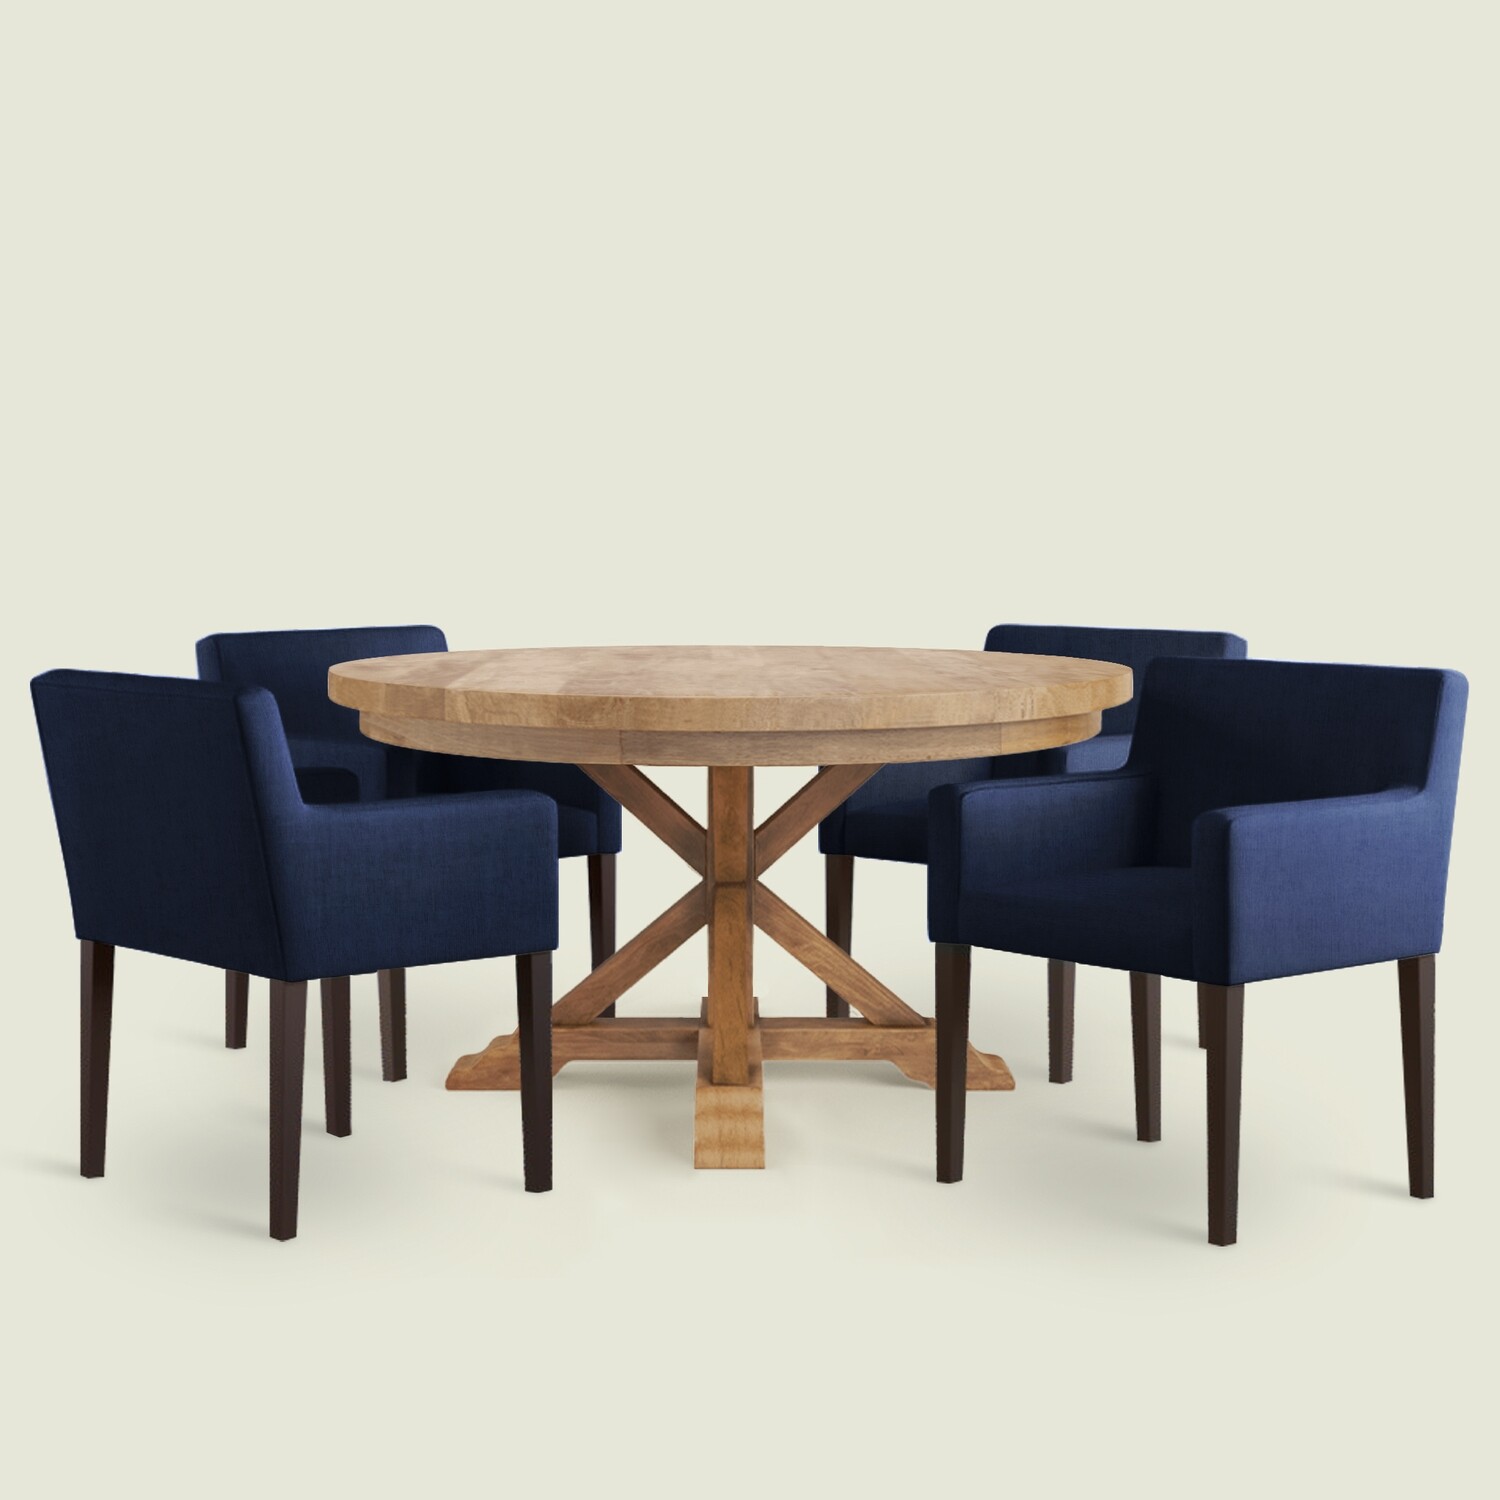 Gable Luxury Dining Table Set with James Chair - 4 Seater/150 cm